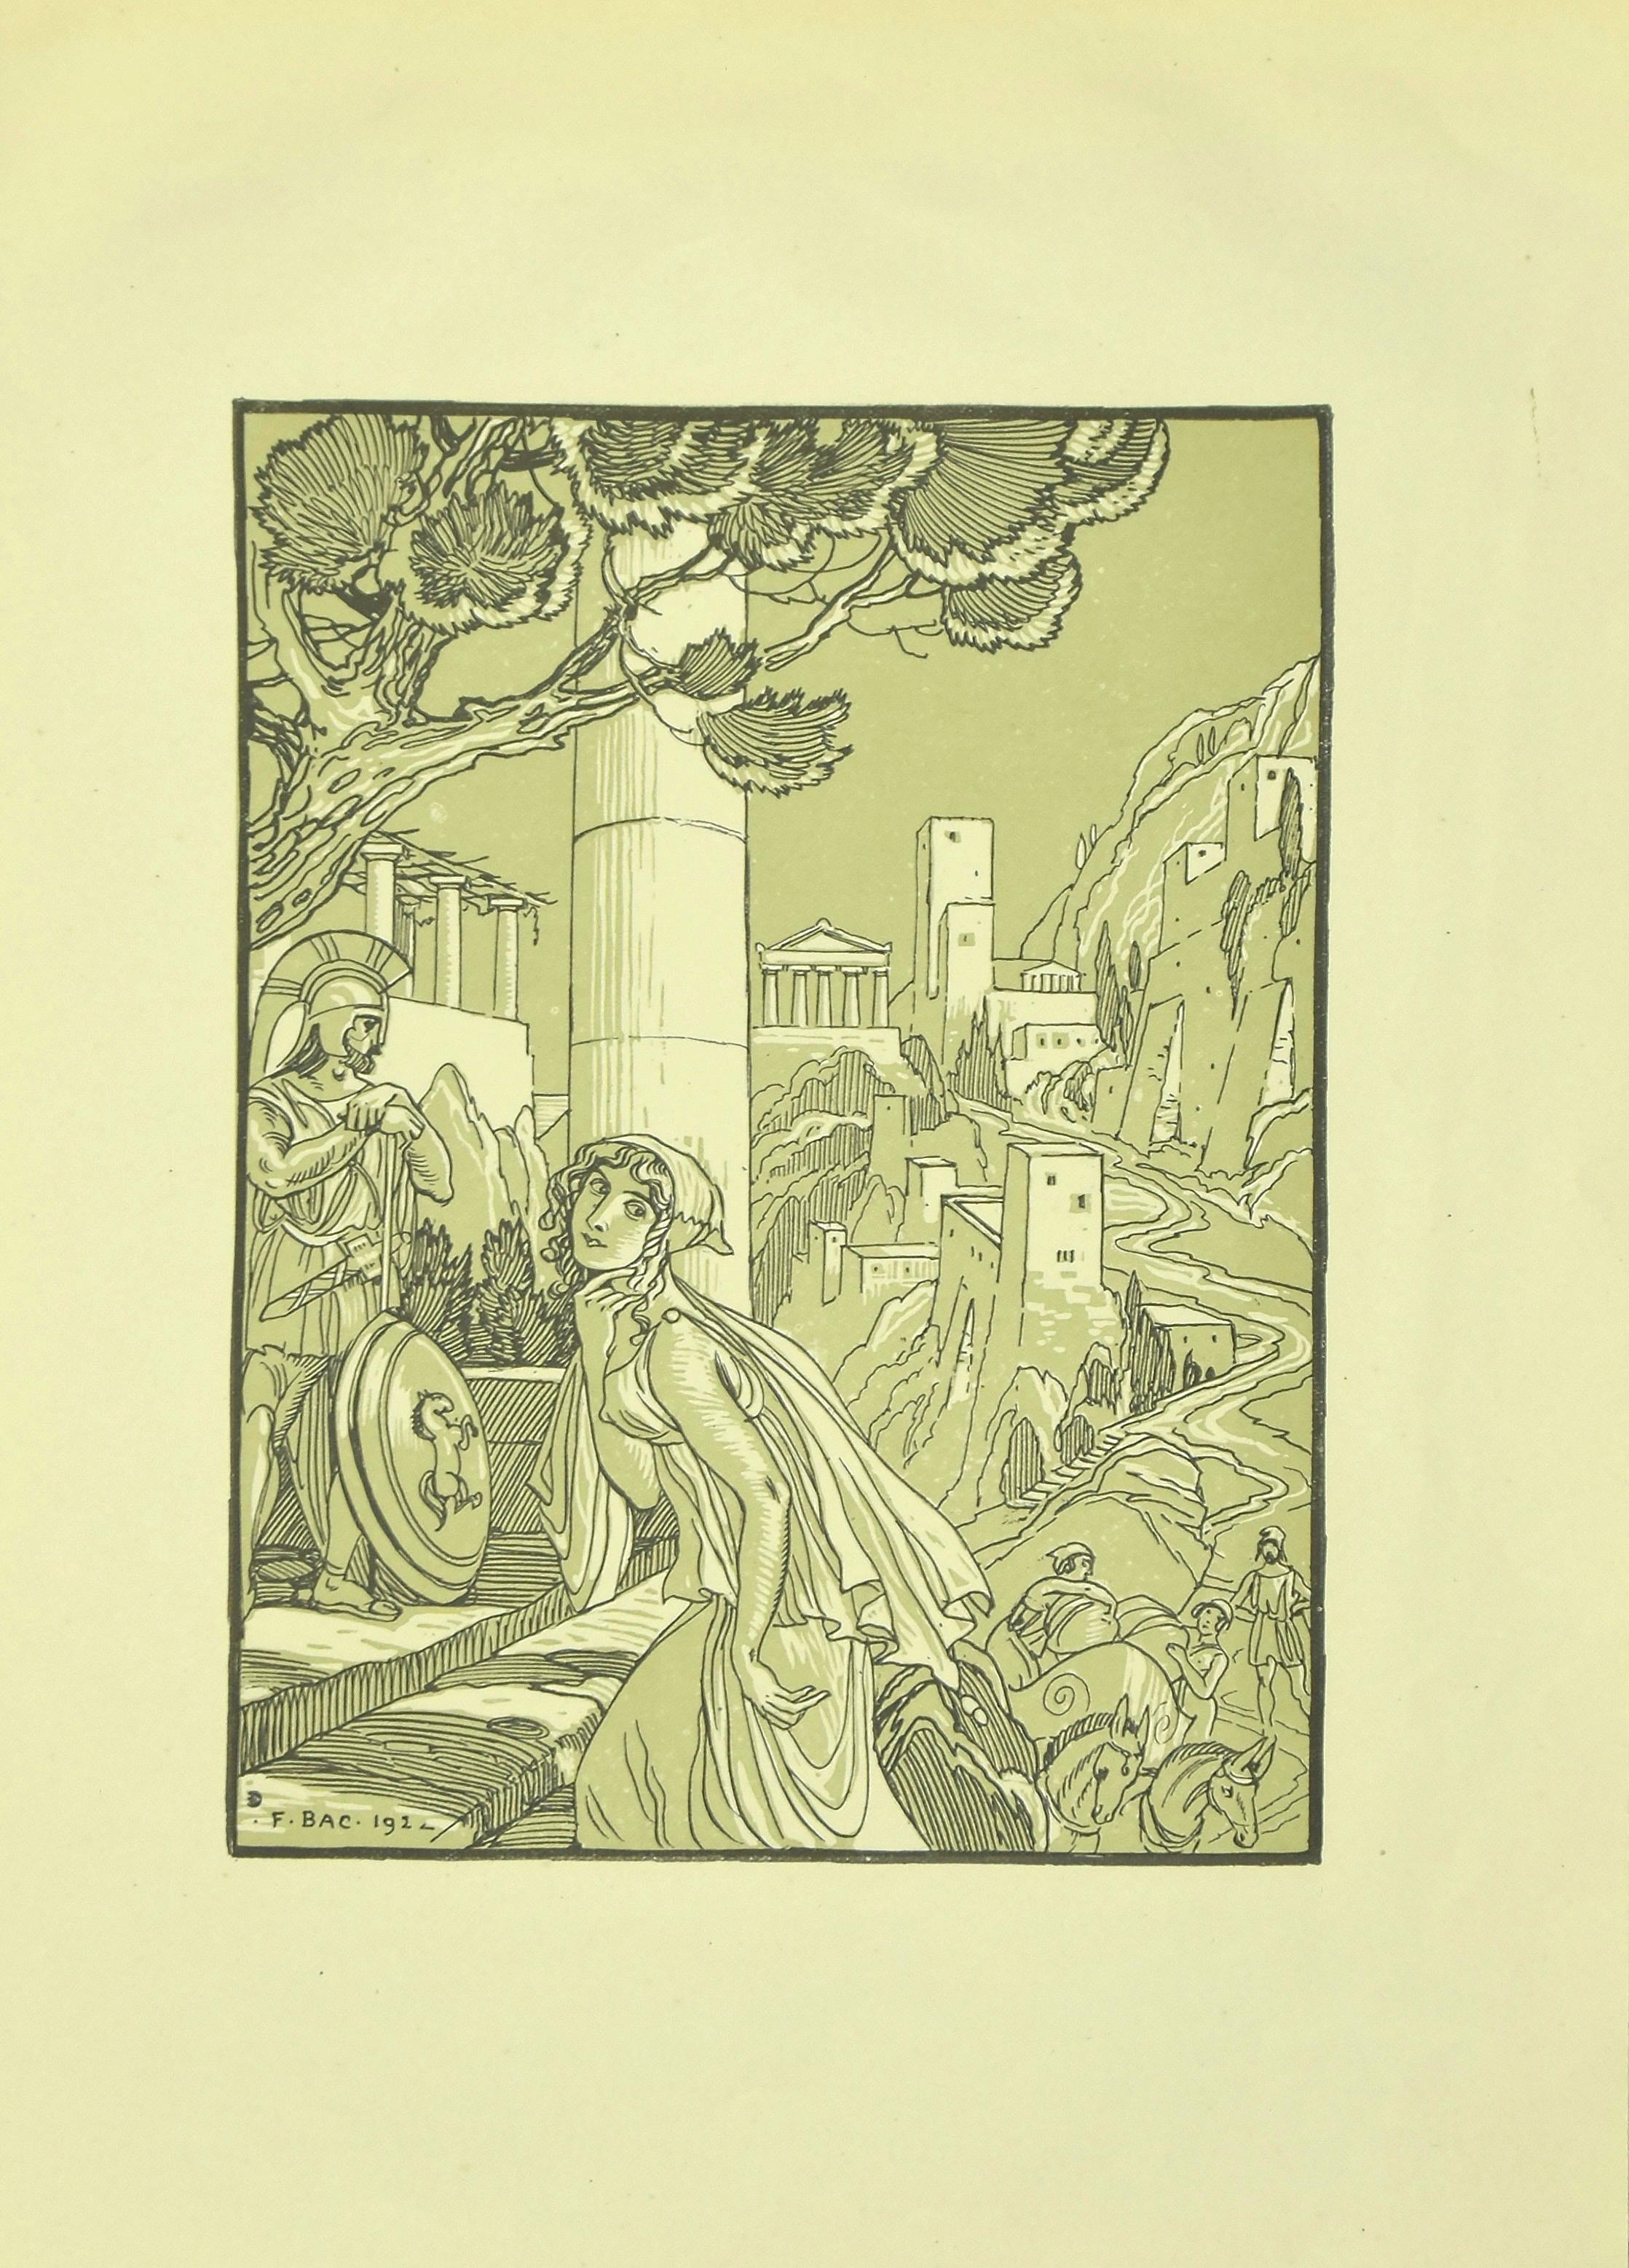 The Greek City - Original Lithograph by F. Bac - 1922